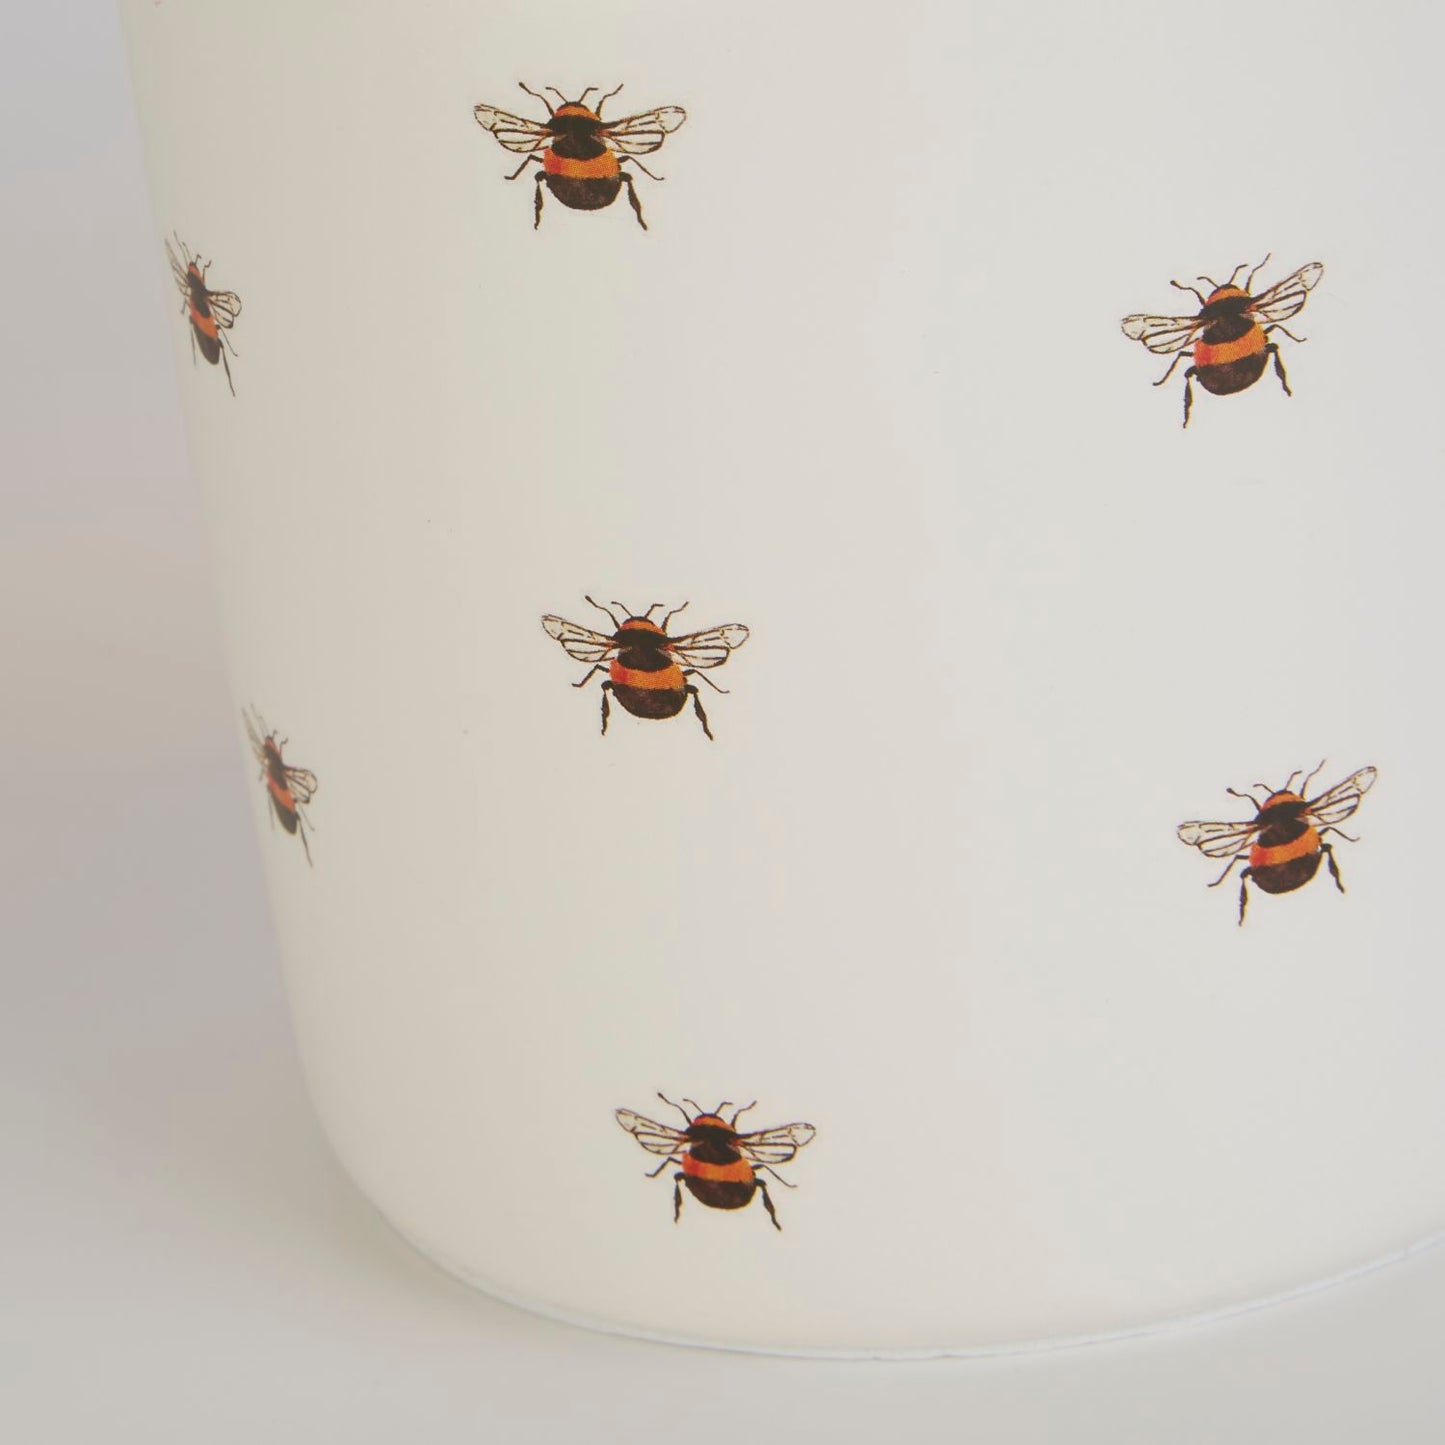 White Bee Table Lamp